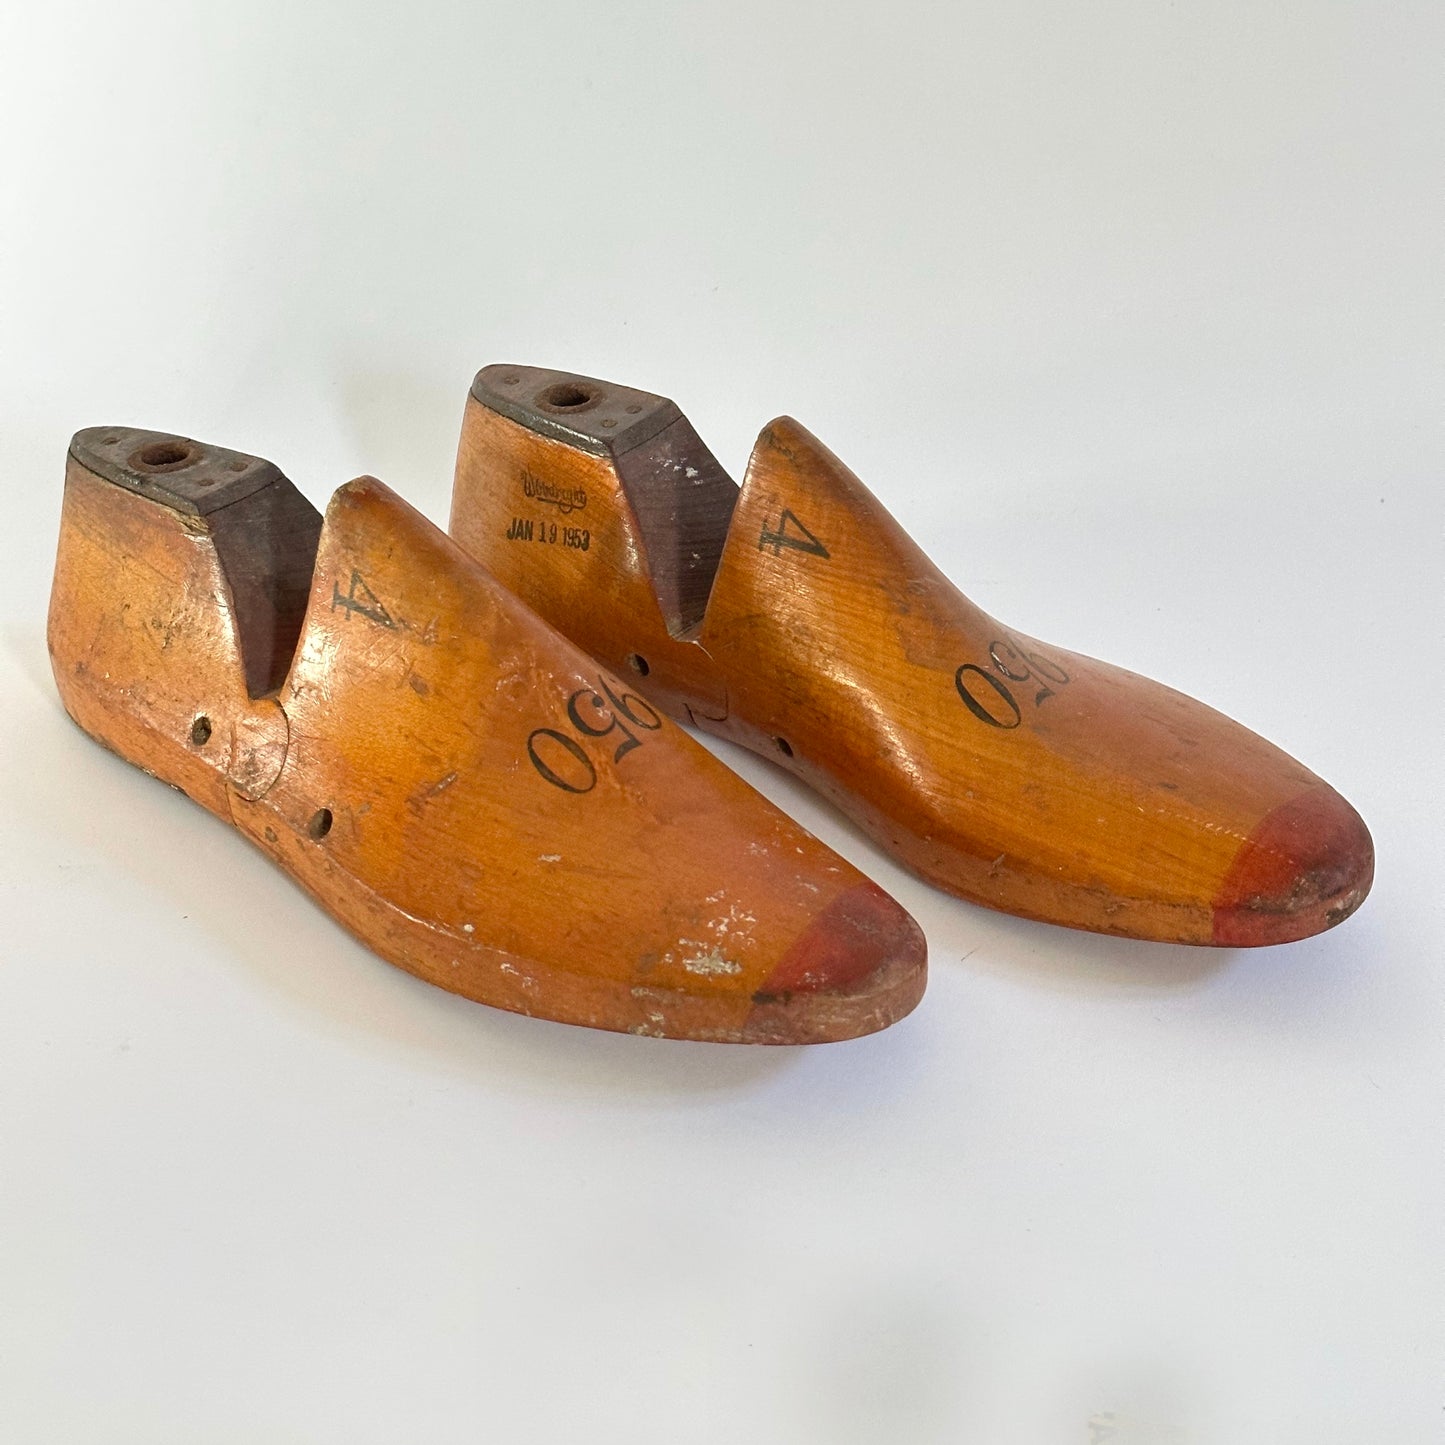 Wooden Shoe Forms